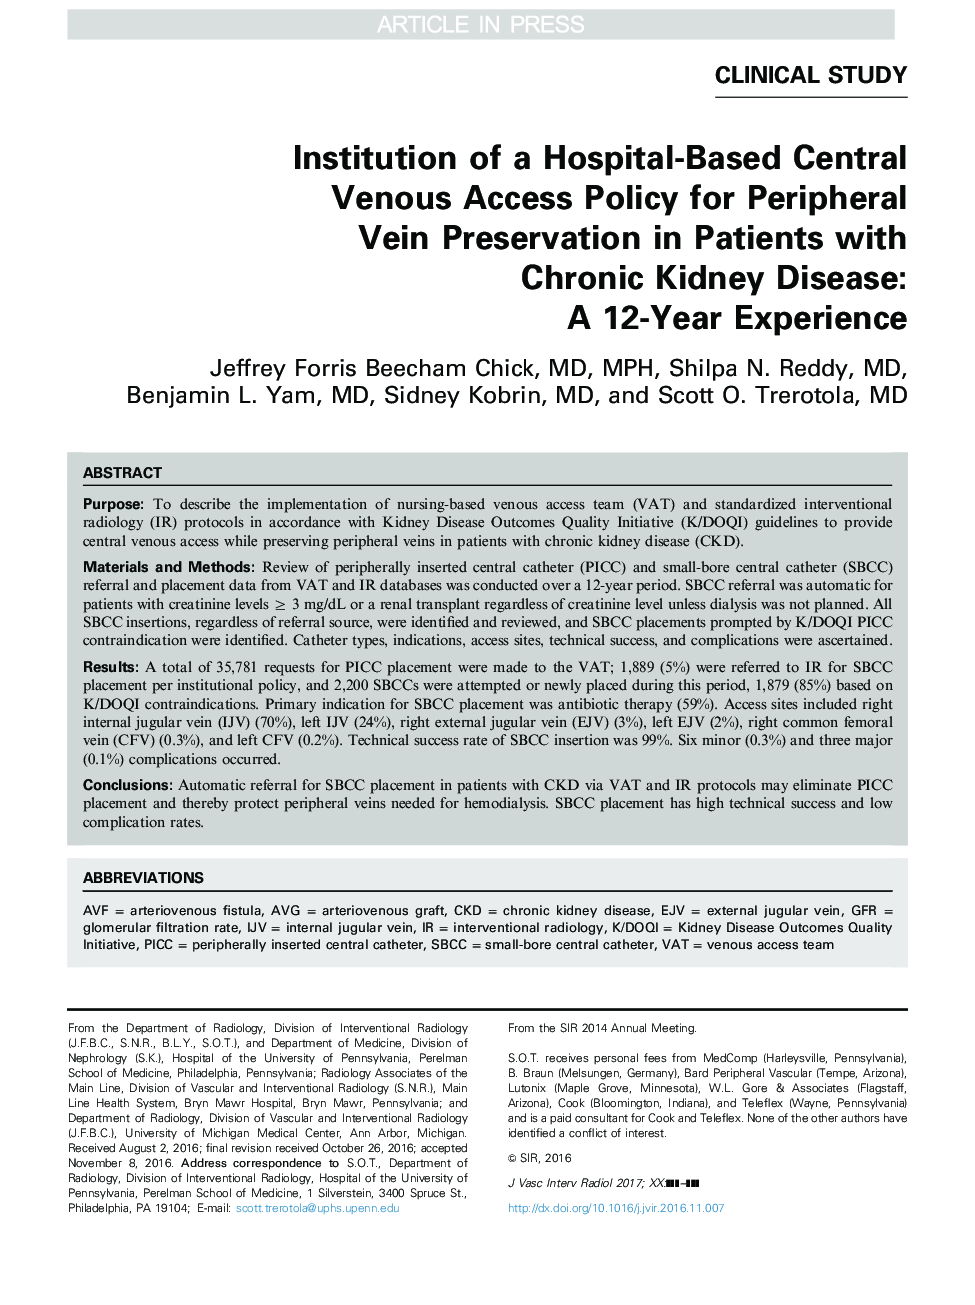 Institution of a Hospital-Based Central Venous Access Policy for Peripheral Vein Preservation in Patients with Chronic Kidney Disease: A 12-Year Experience